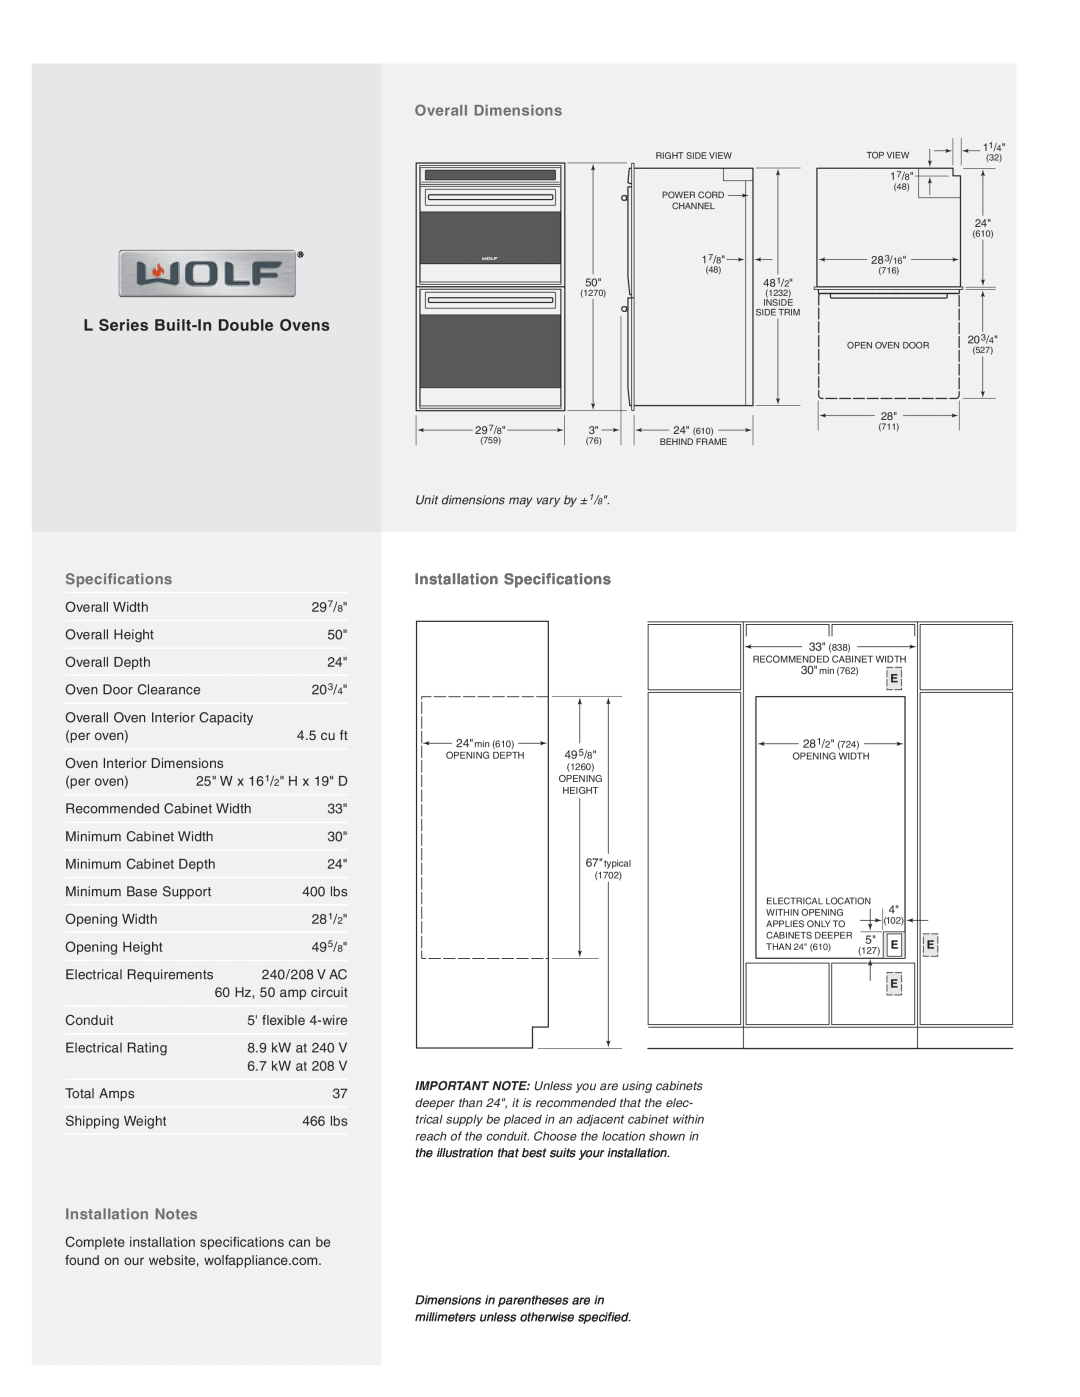 Wolf Appliance Company DO30U/B, DO30U/S, DO30F/S Overall Dimensions, Installation Specifications, Installation Notes 